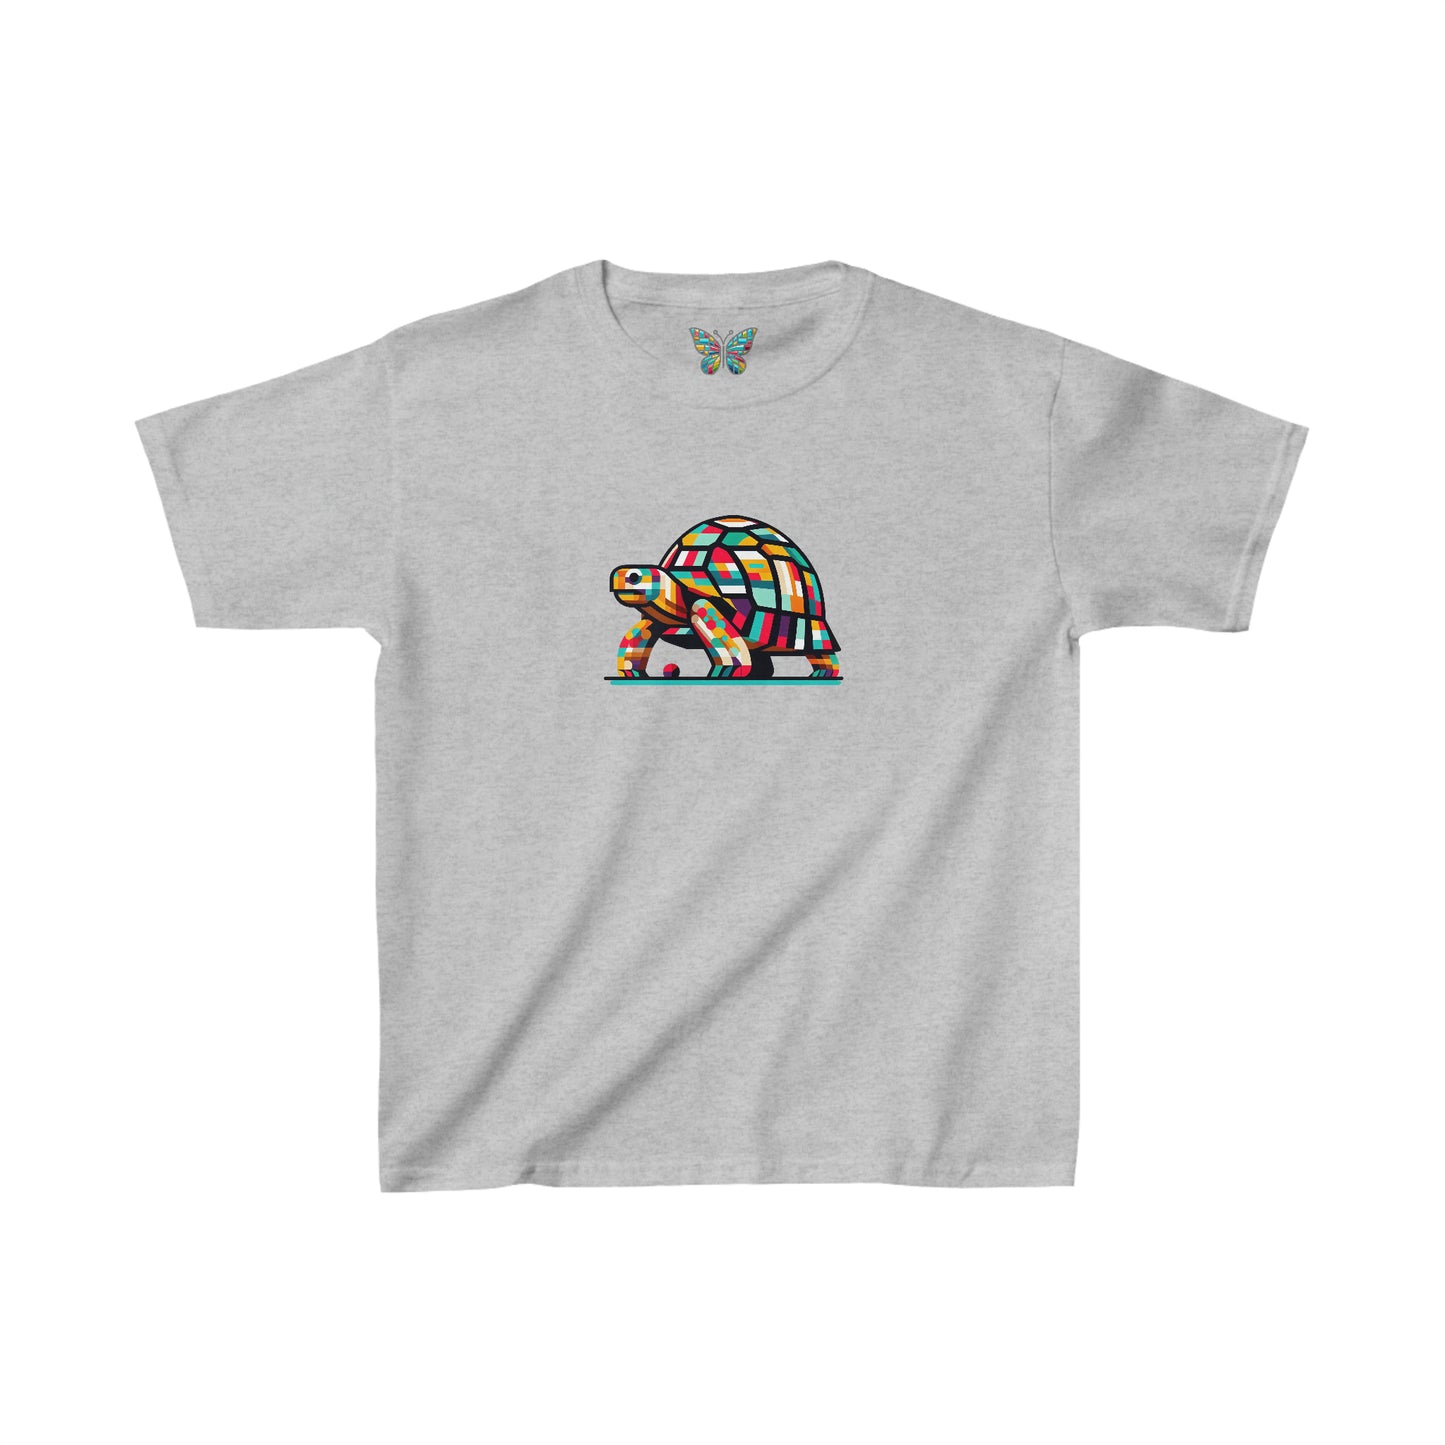 Gopher Tortoise Serenique - Youth - Snazzle Tee